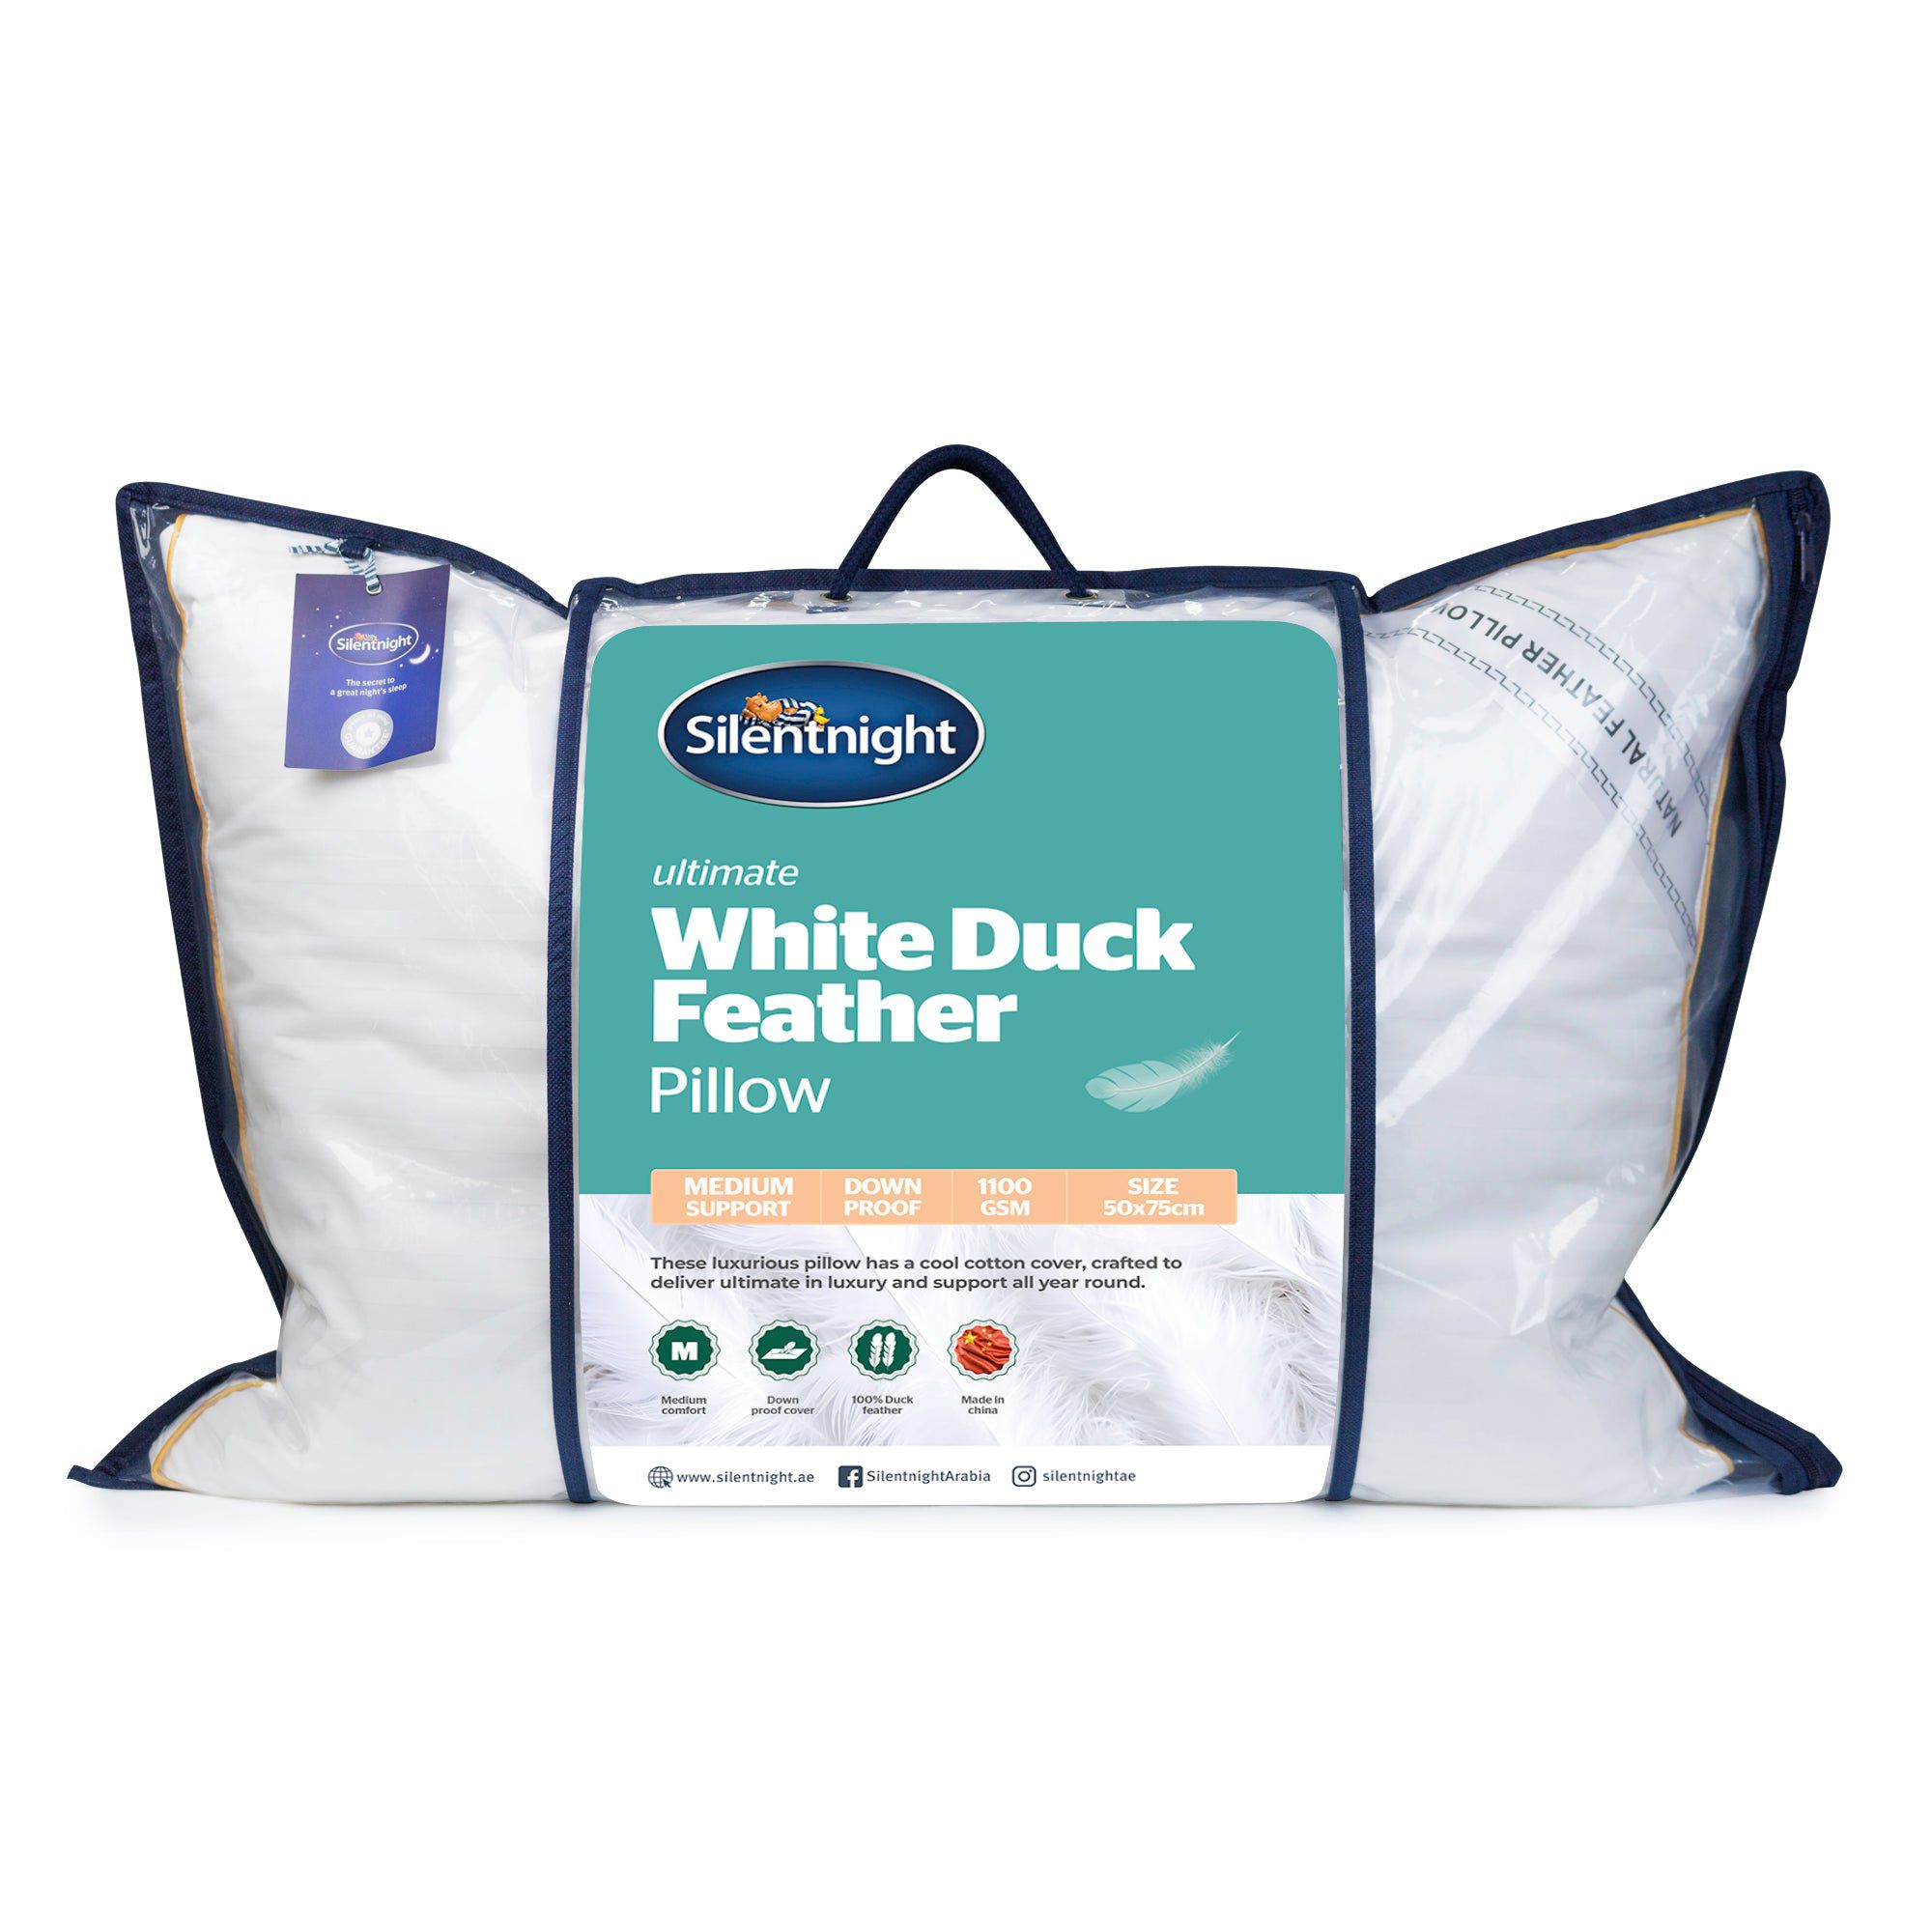 Ultimate White Duck Feather Pillow